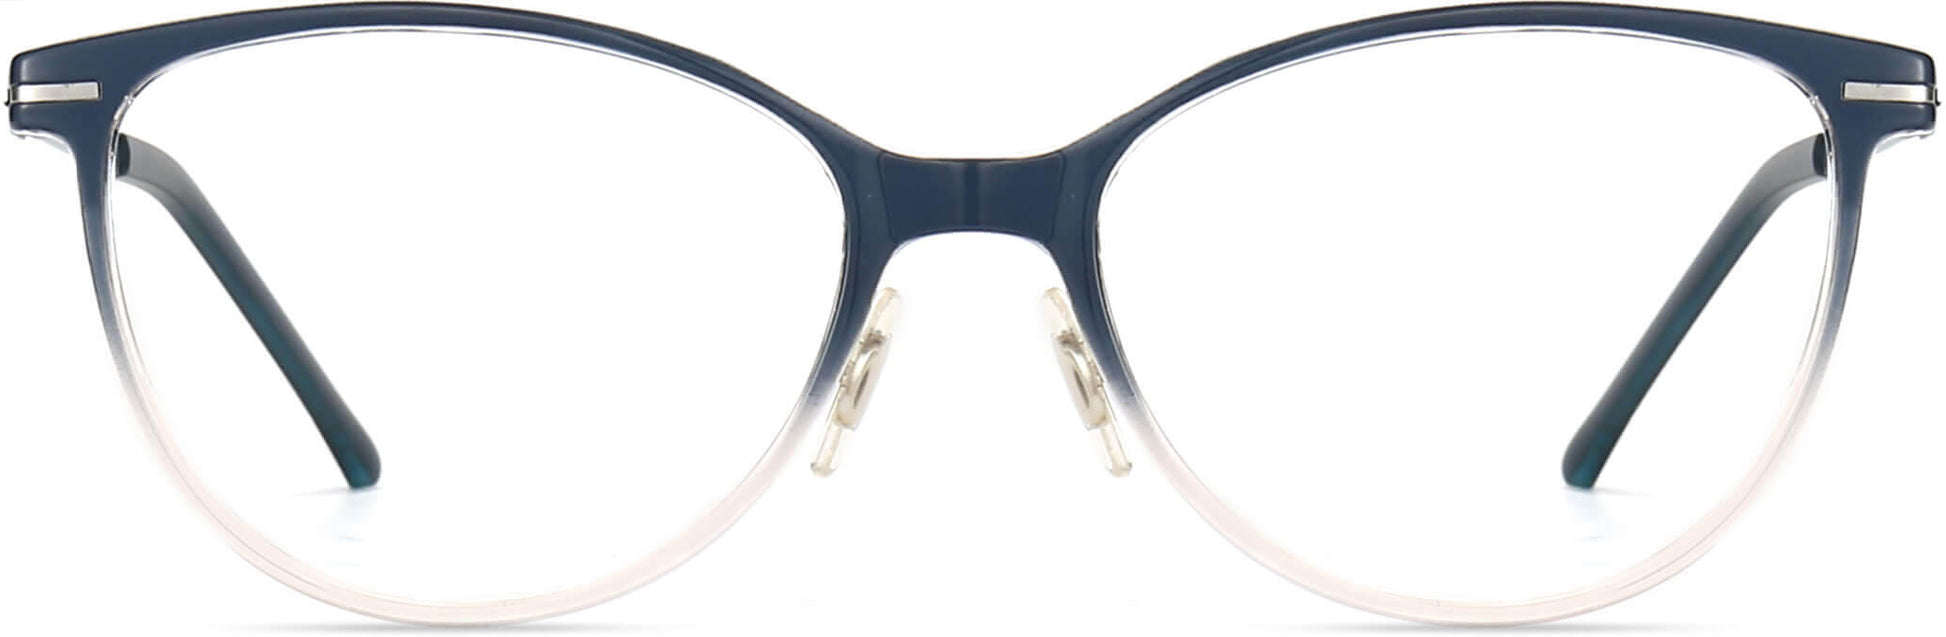 Paige Cateye Blue Eyeglasses from ANRRI, front view